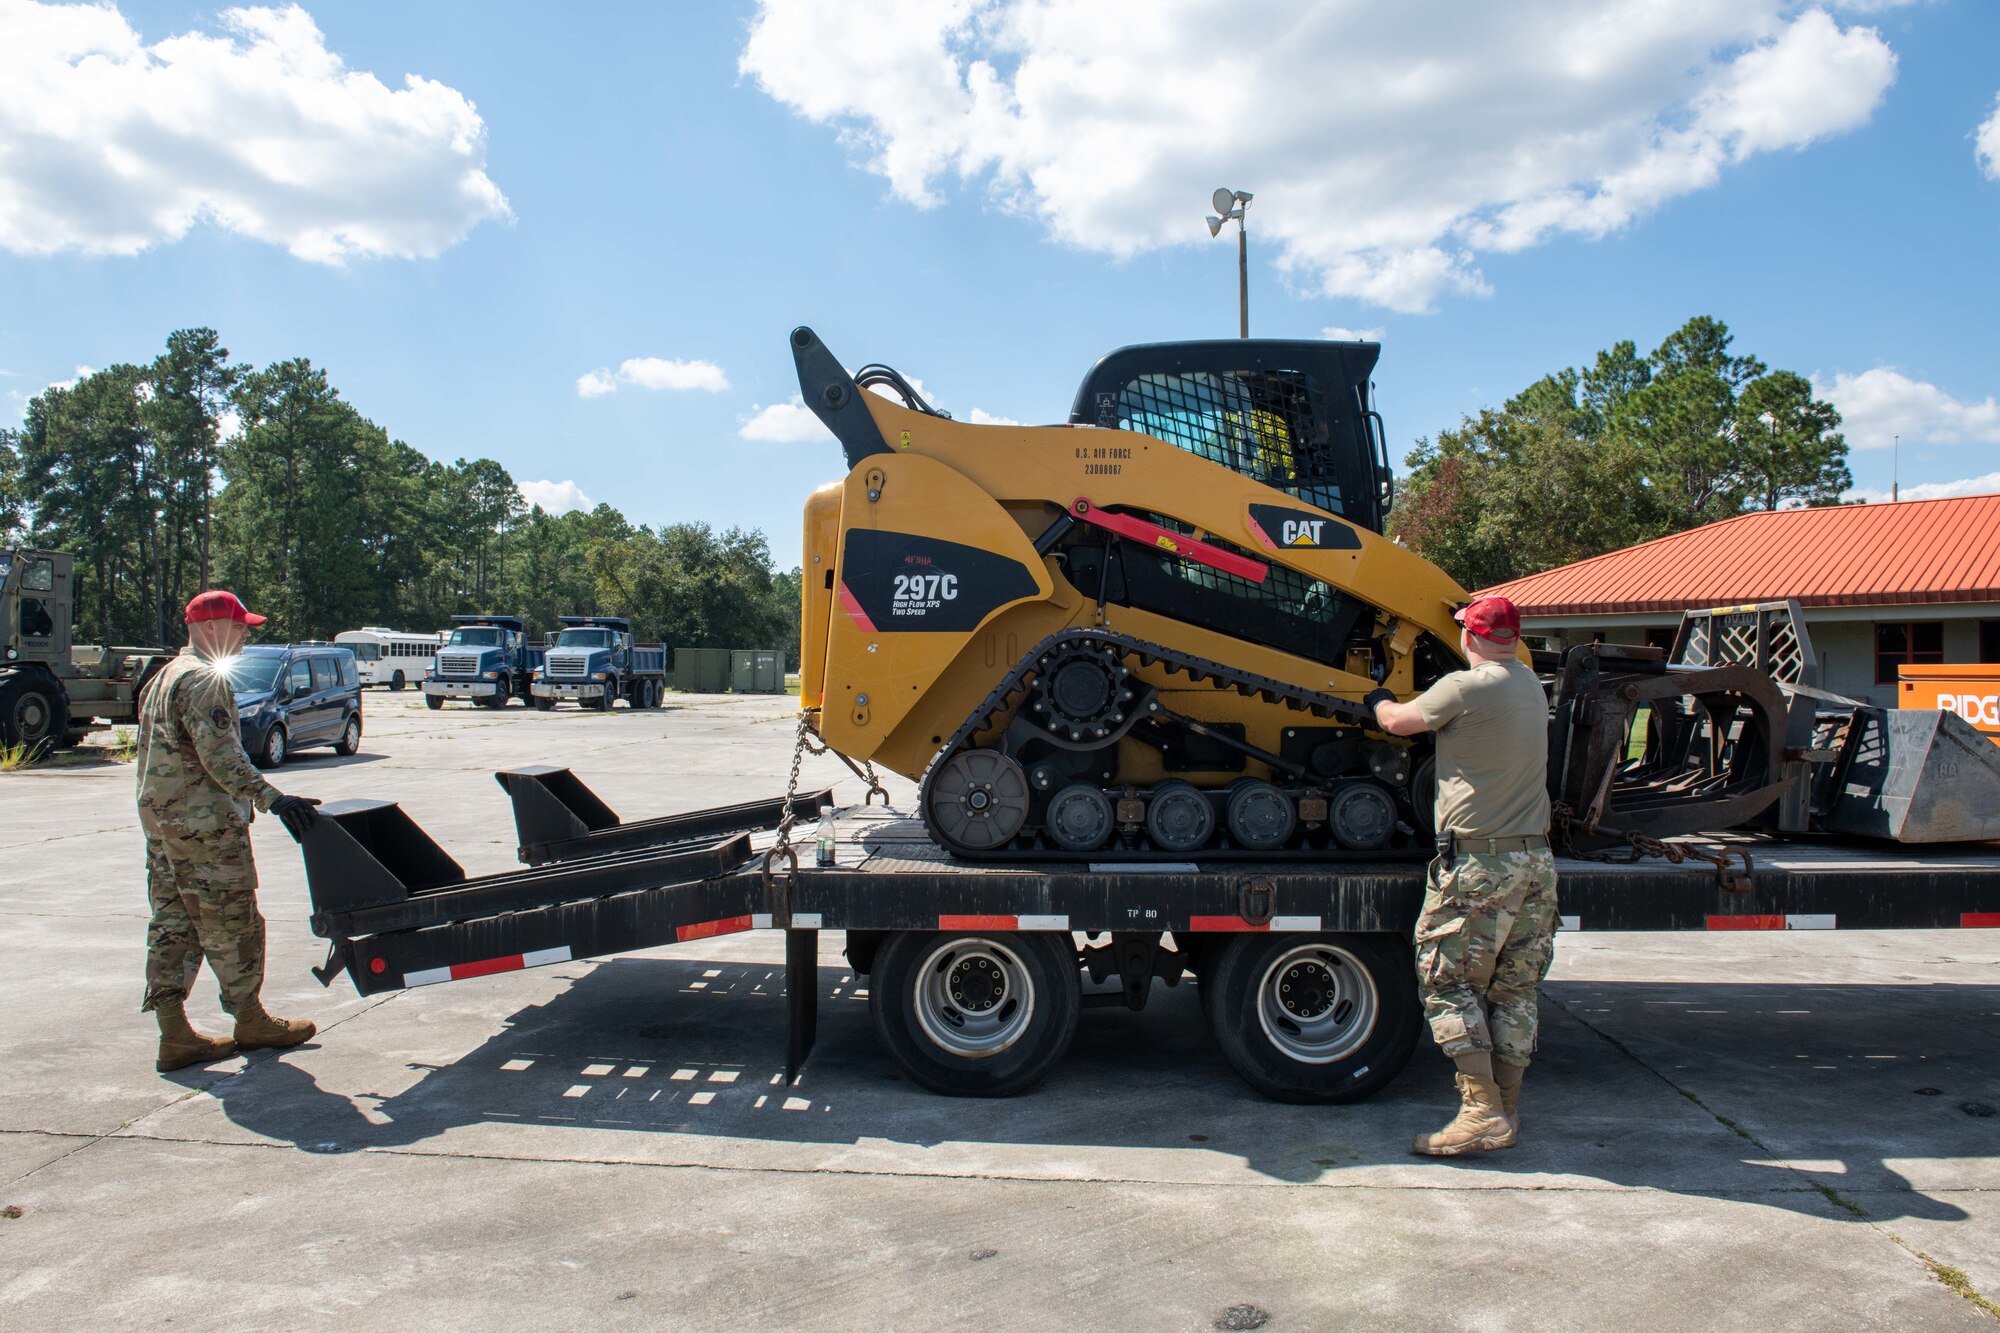 Florida Air National Guard Air Force Tech Sgt. James Bishop and Staff Sgt. Dustin Hart, 202nd Rapid Engineer Deployable Heavy Operational Repair Engineers (RED HORSE) heavy equipment operators, load a skid-steer onto a trailer ahead of Hurricane Ian response efforts at Camp Blanding Joint Training Center in Starke, Florida, Sept. 26, 2022.